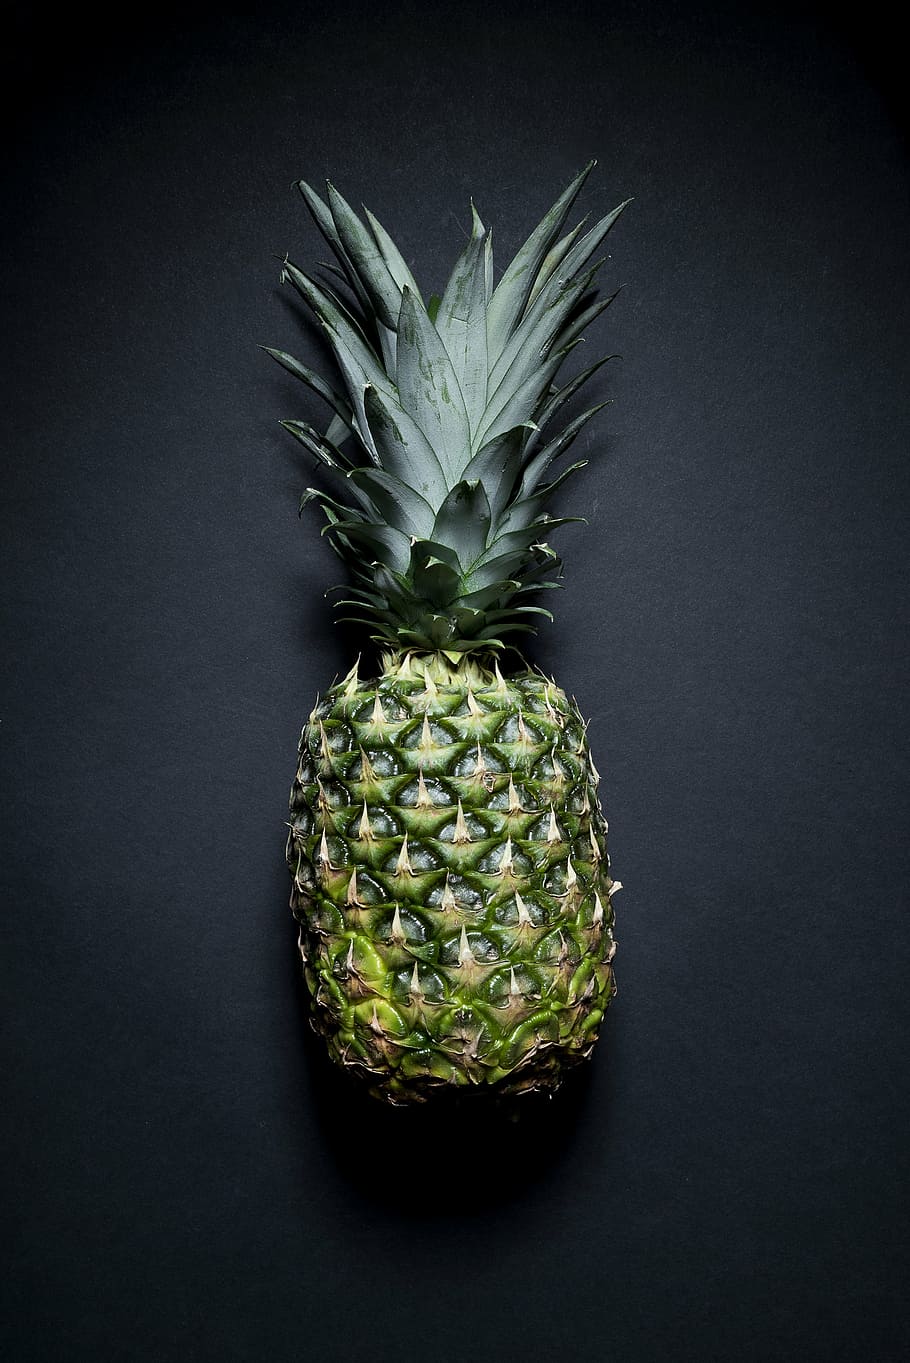 green pineapple, green, pineapple, fruit, healthy, food, healthy eating, food and drink, freshness, studio shot